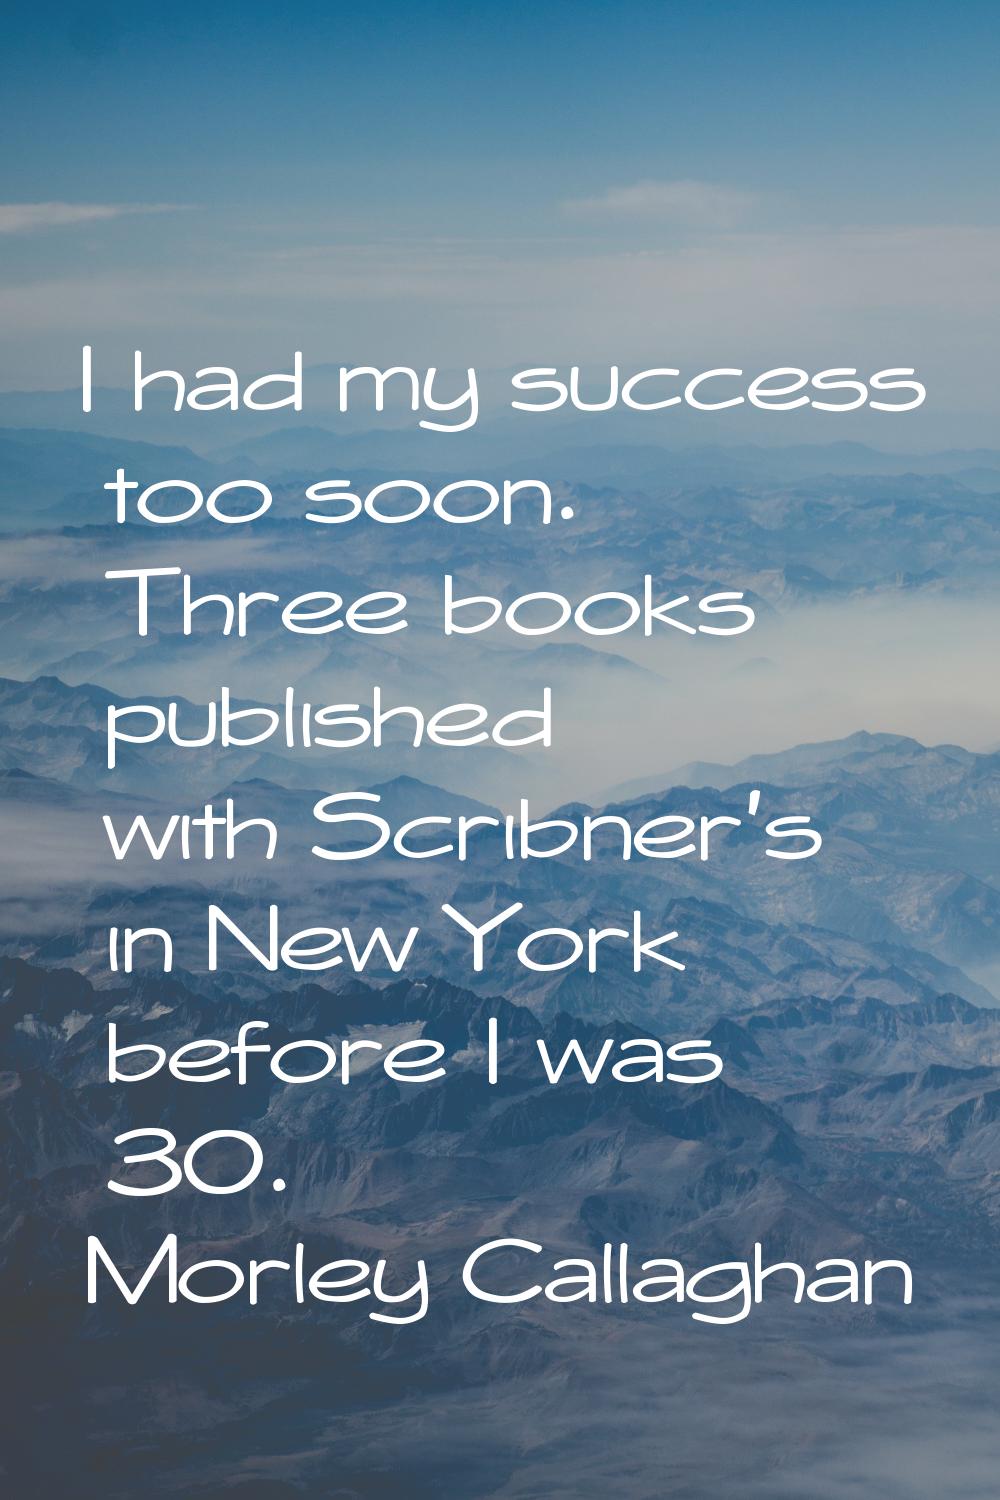 I had my success too soon. Three books published with Scribner's in New York before I was 30.